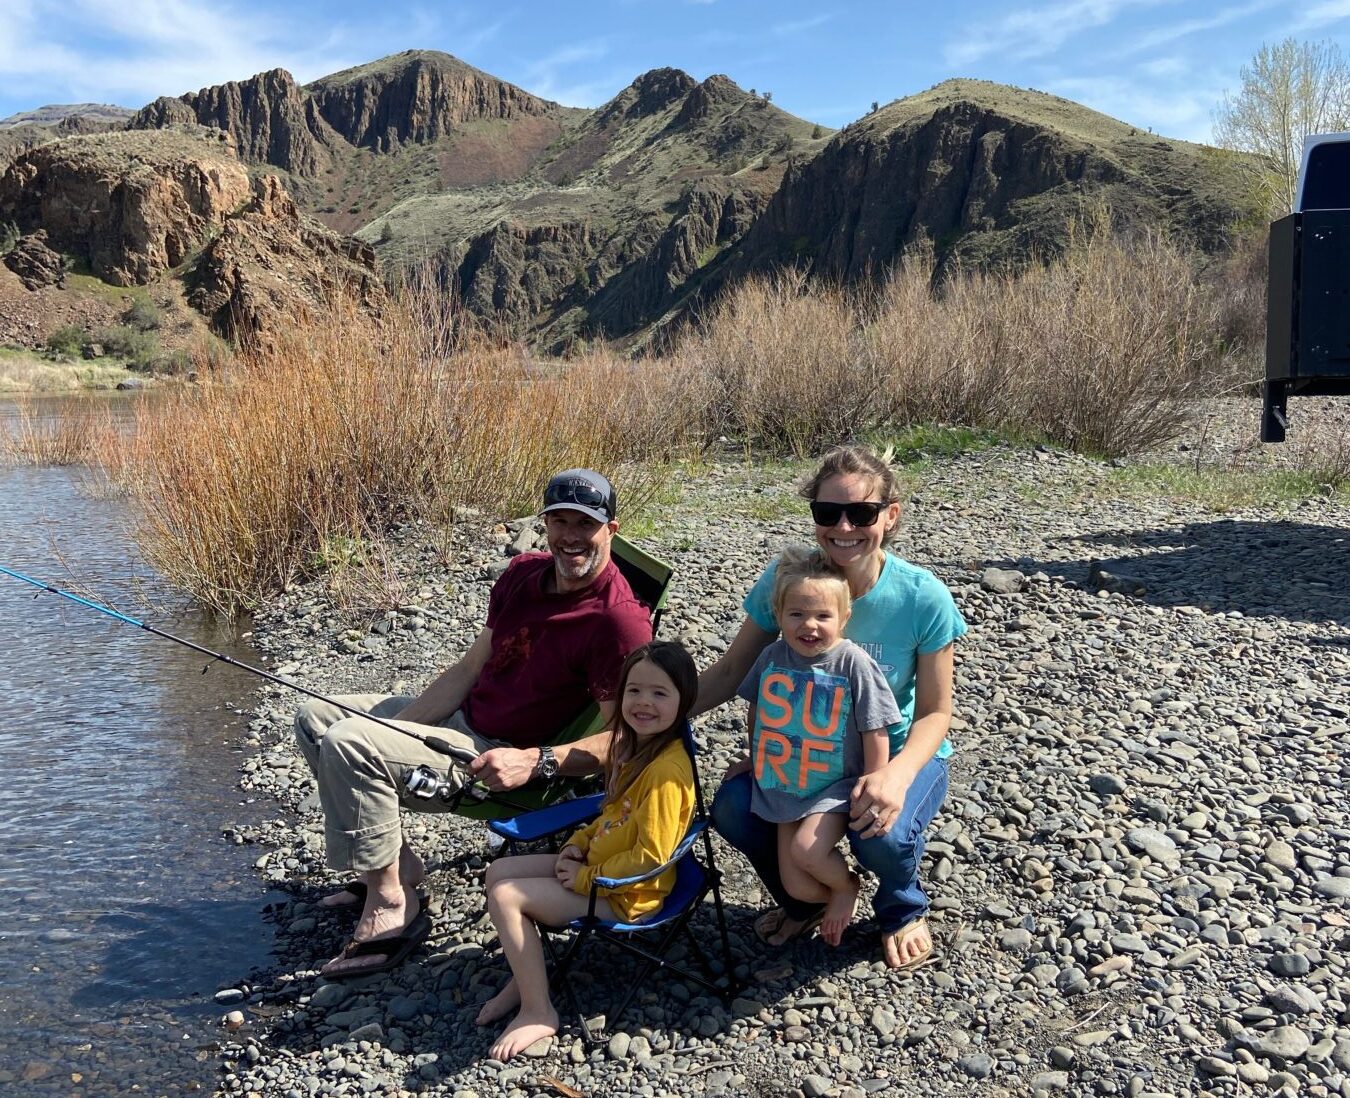 Camping as a family out of a campervan on the John Day River.